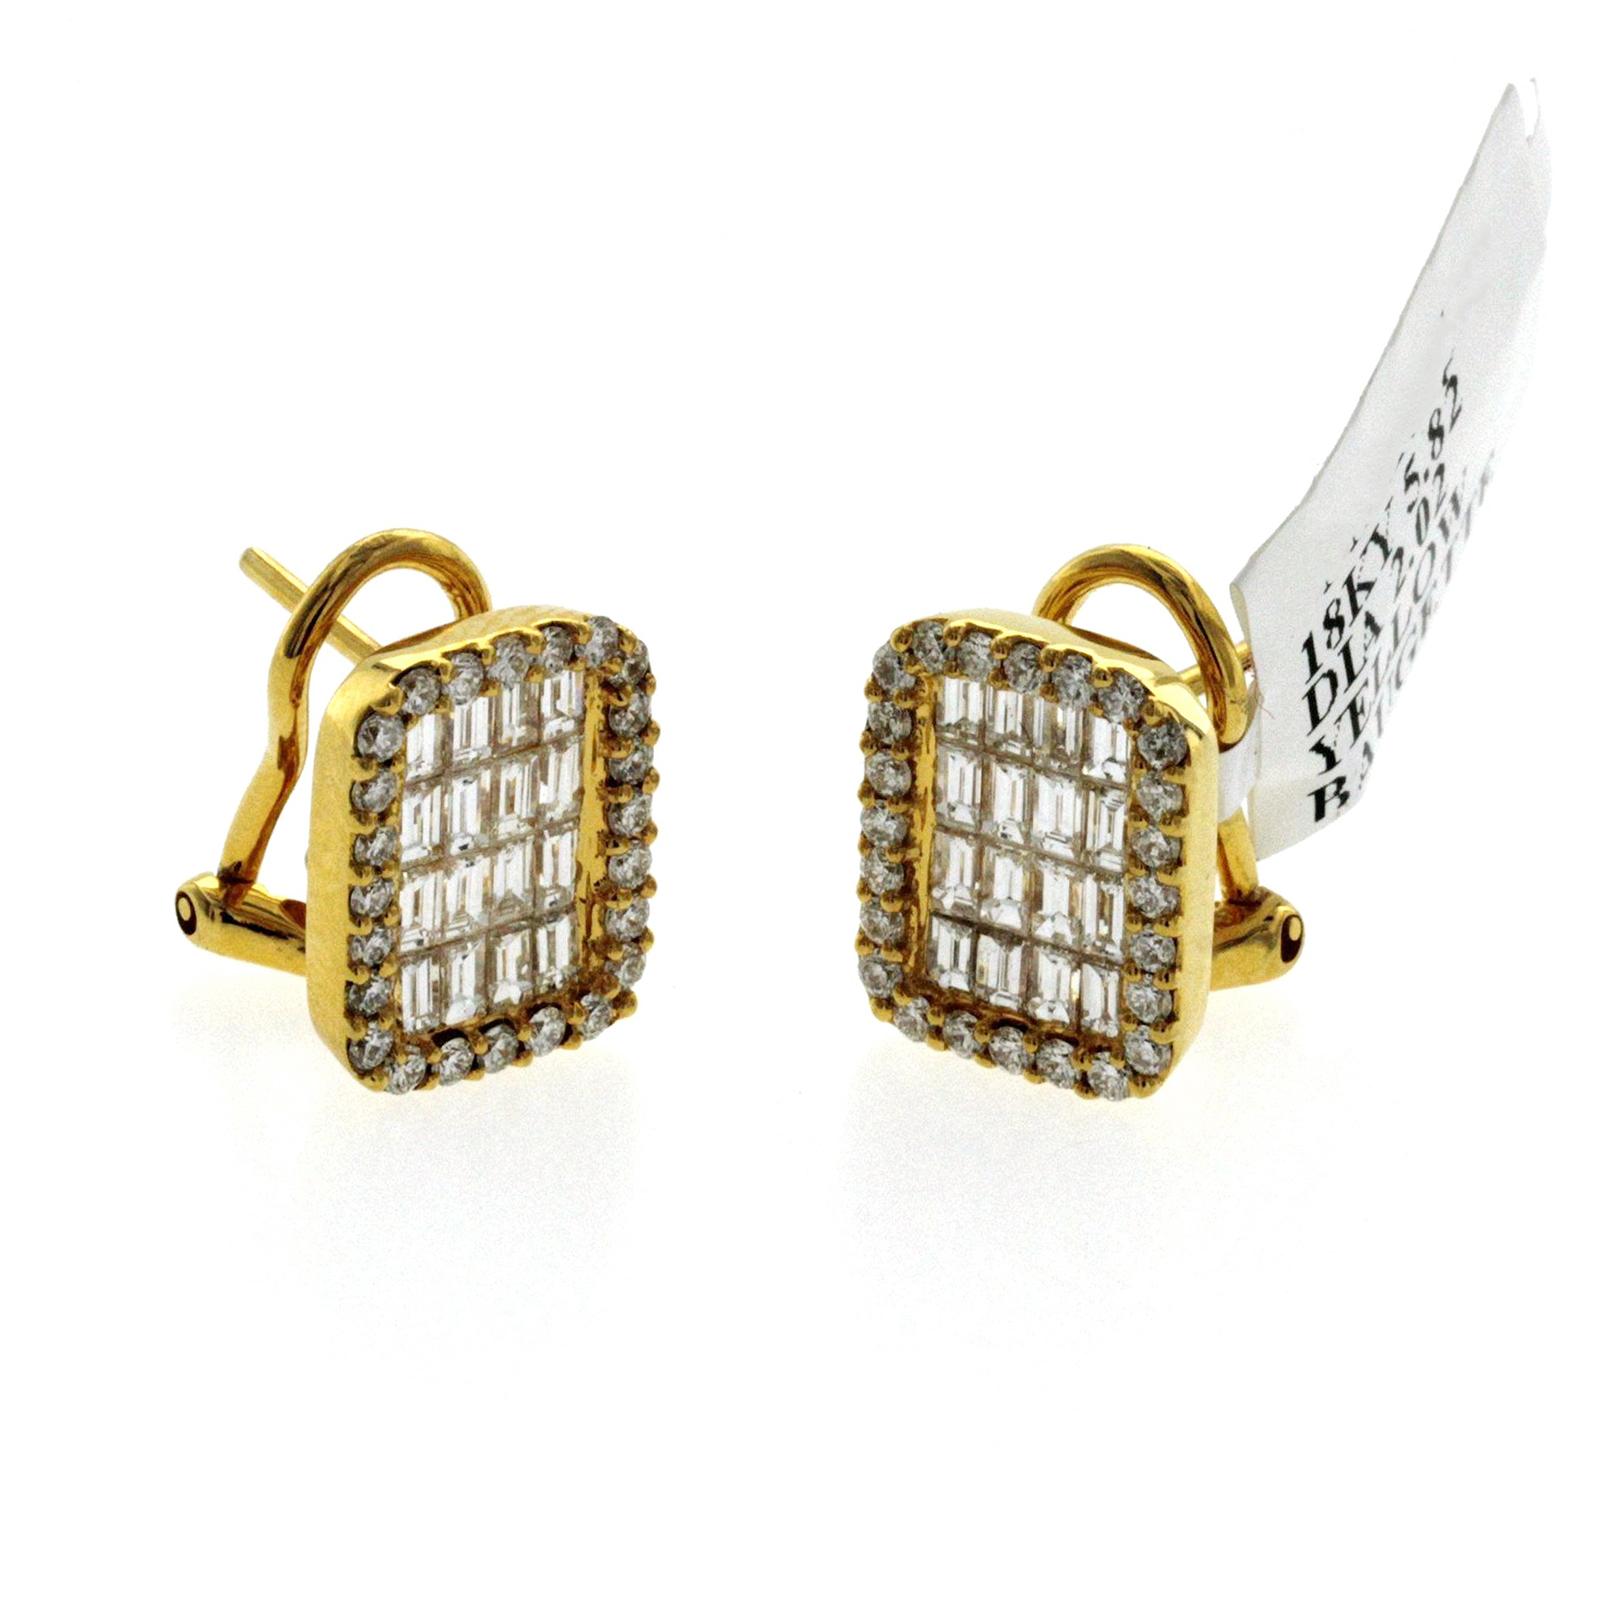 Fine 18 Karat Yellow Gold 2.02 Carat Natural Diamonds Omega Back Earrings In Excellent Condition For Sale In Los Angeles, CA